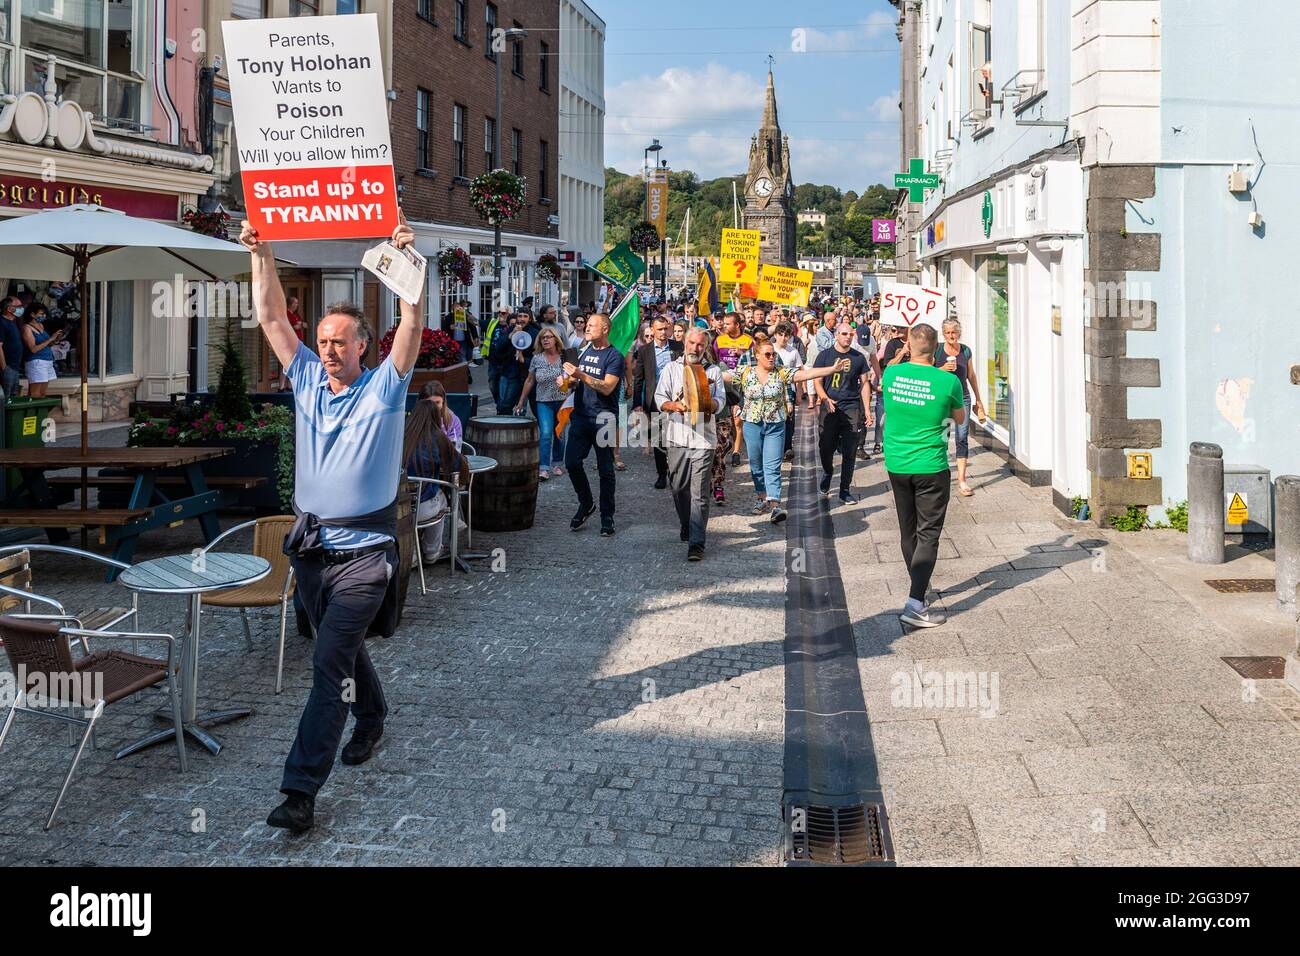 Waterford, Ireland. 28th Aug, 2021. Around 200 people gathered this afternoon in Waterford city centre to protest against the COVID-19 vaccines, which they say are experimental and still on trial. The protestors gathered at the clock tower on Meagher's Quay and marched through the city centre. Credit: AG News/Alamy Live News Stock Photo